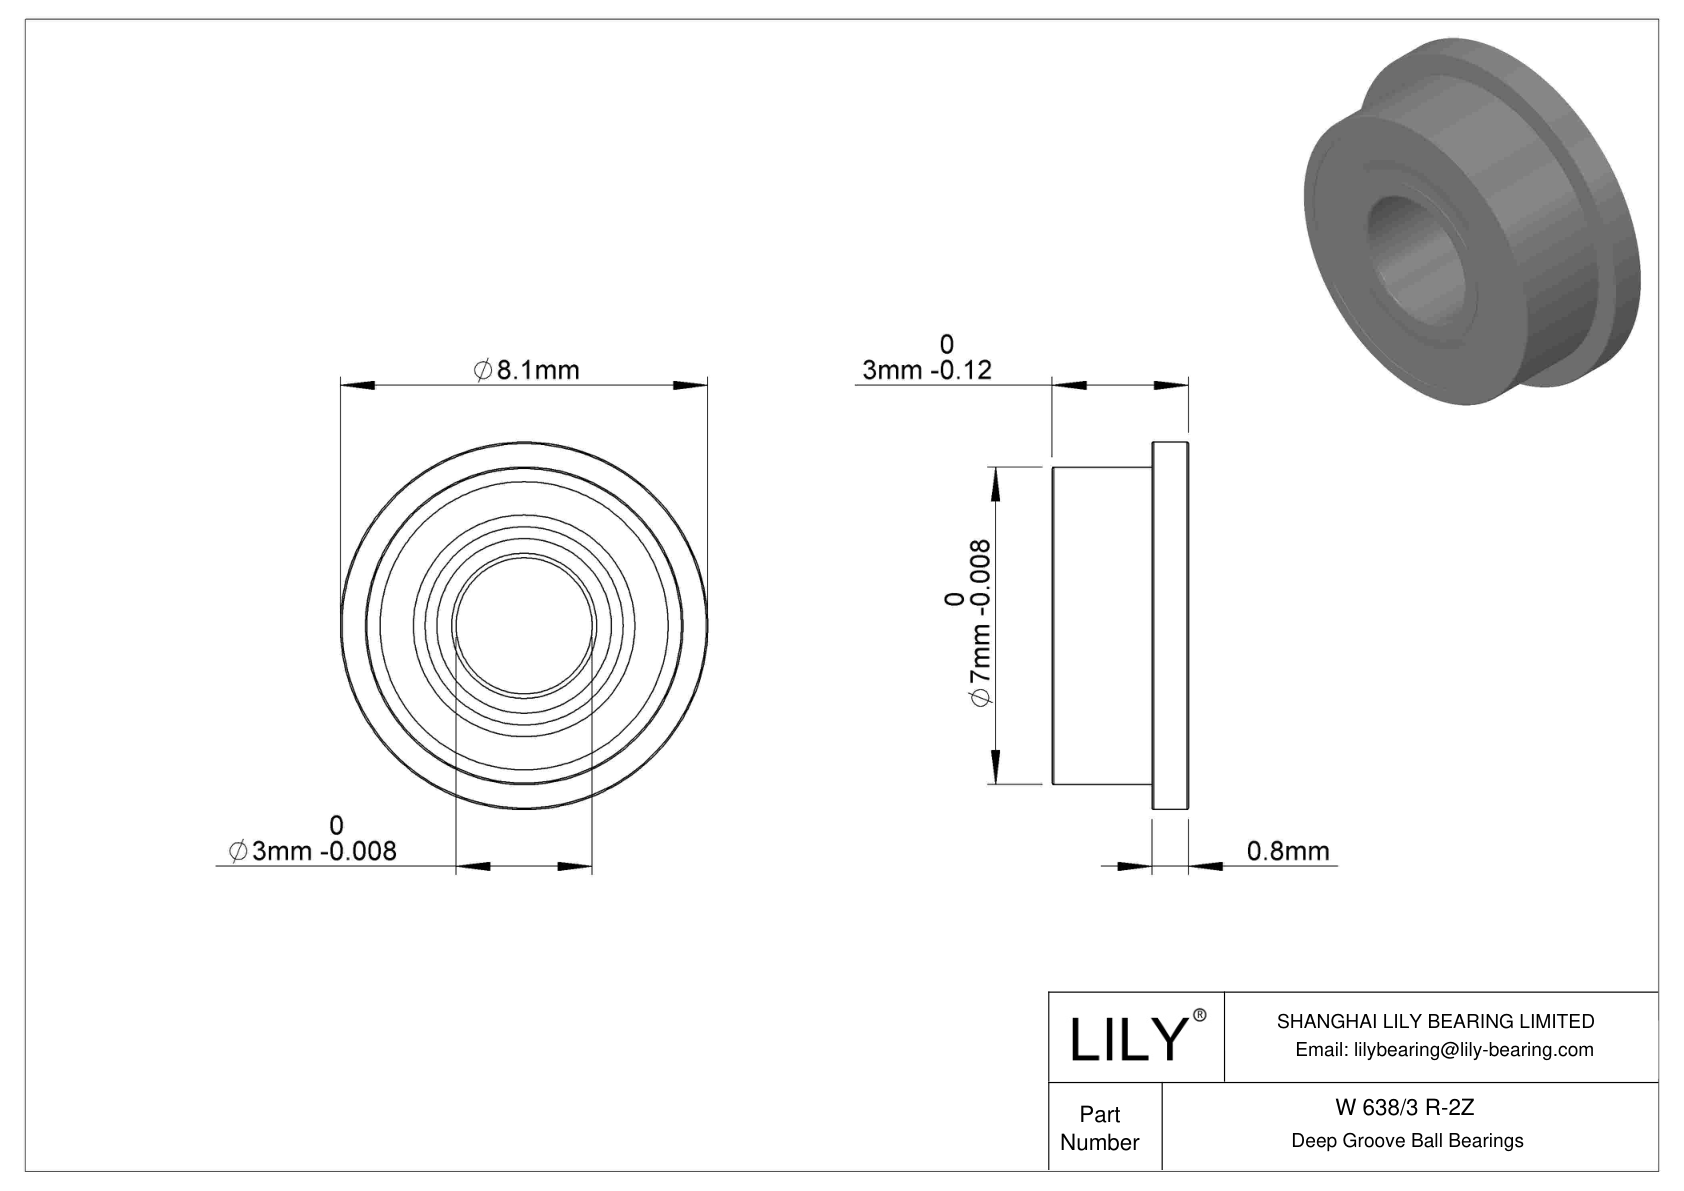 W 638/3 R-2Z Flanged Ball Bearings cad drawing